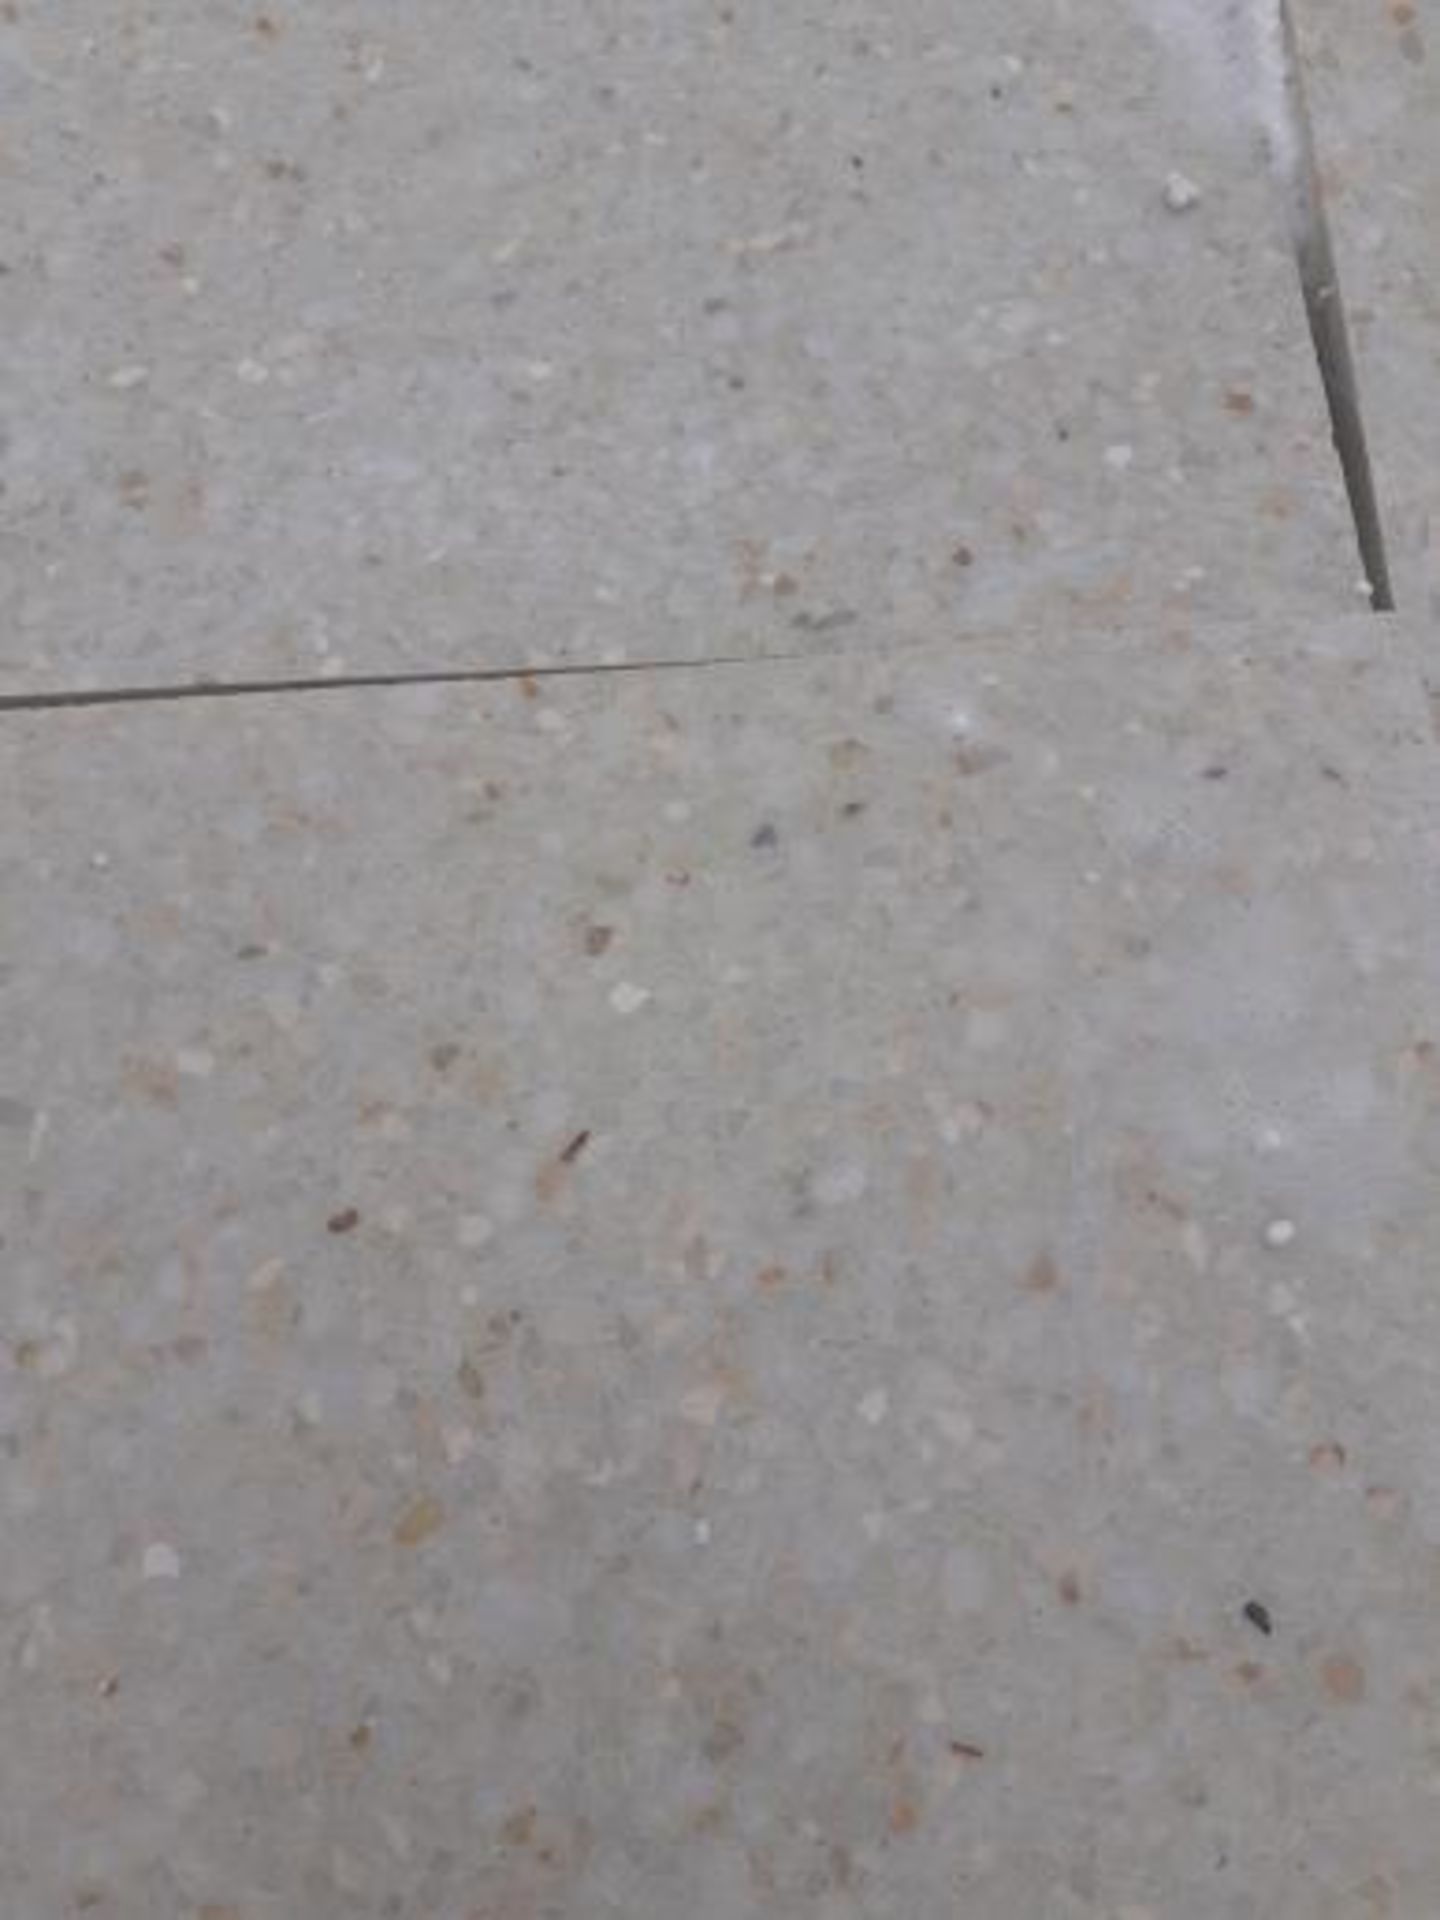 1 PALLET OF BRAND NEW TERRAZZO COMMERCIAL FLOOR TILES (Z30011), COVERS 24 SQUARE YARDS *PLUS VAT* - Image 8 of 15